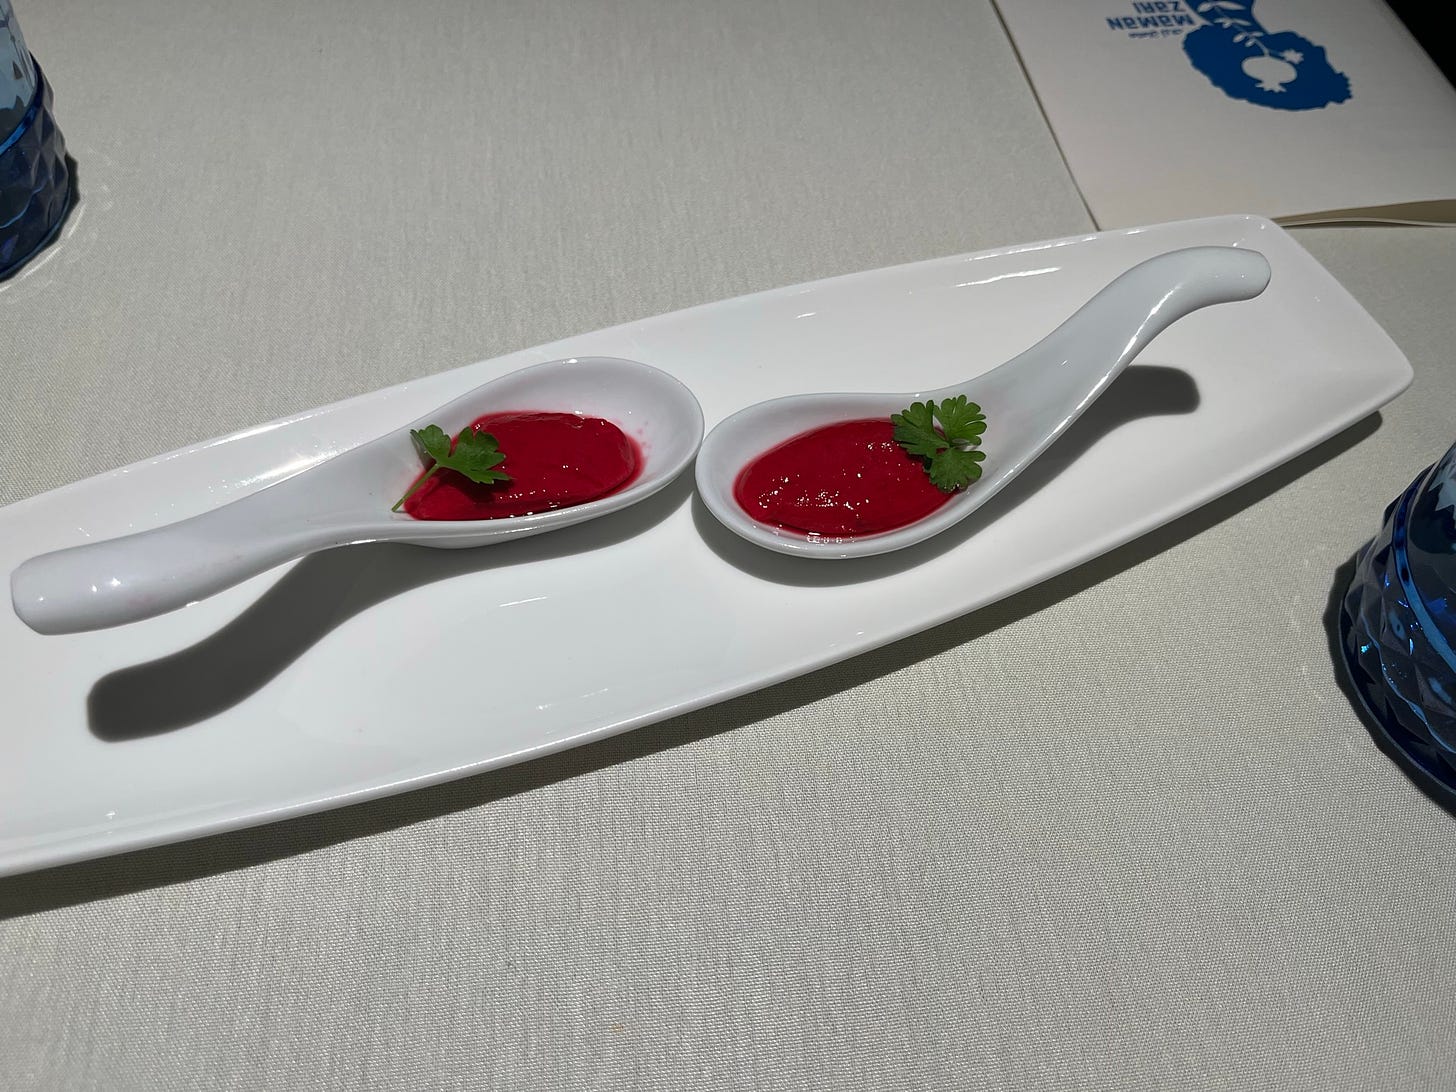 Beet-red pudding with parsley on big spoons